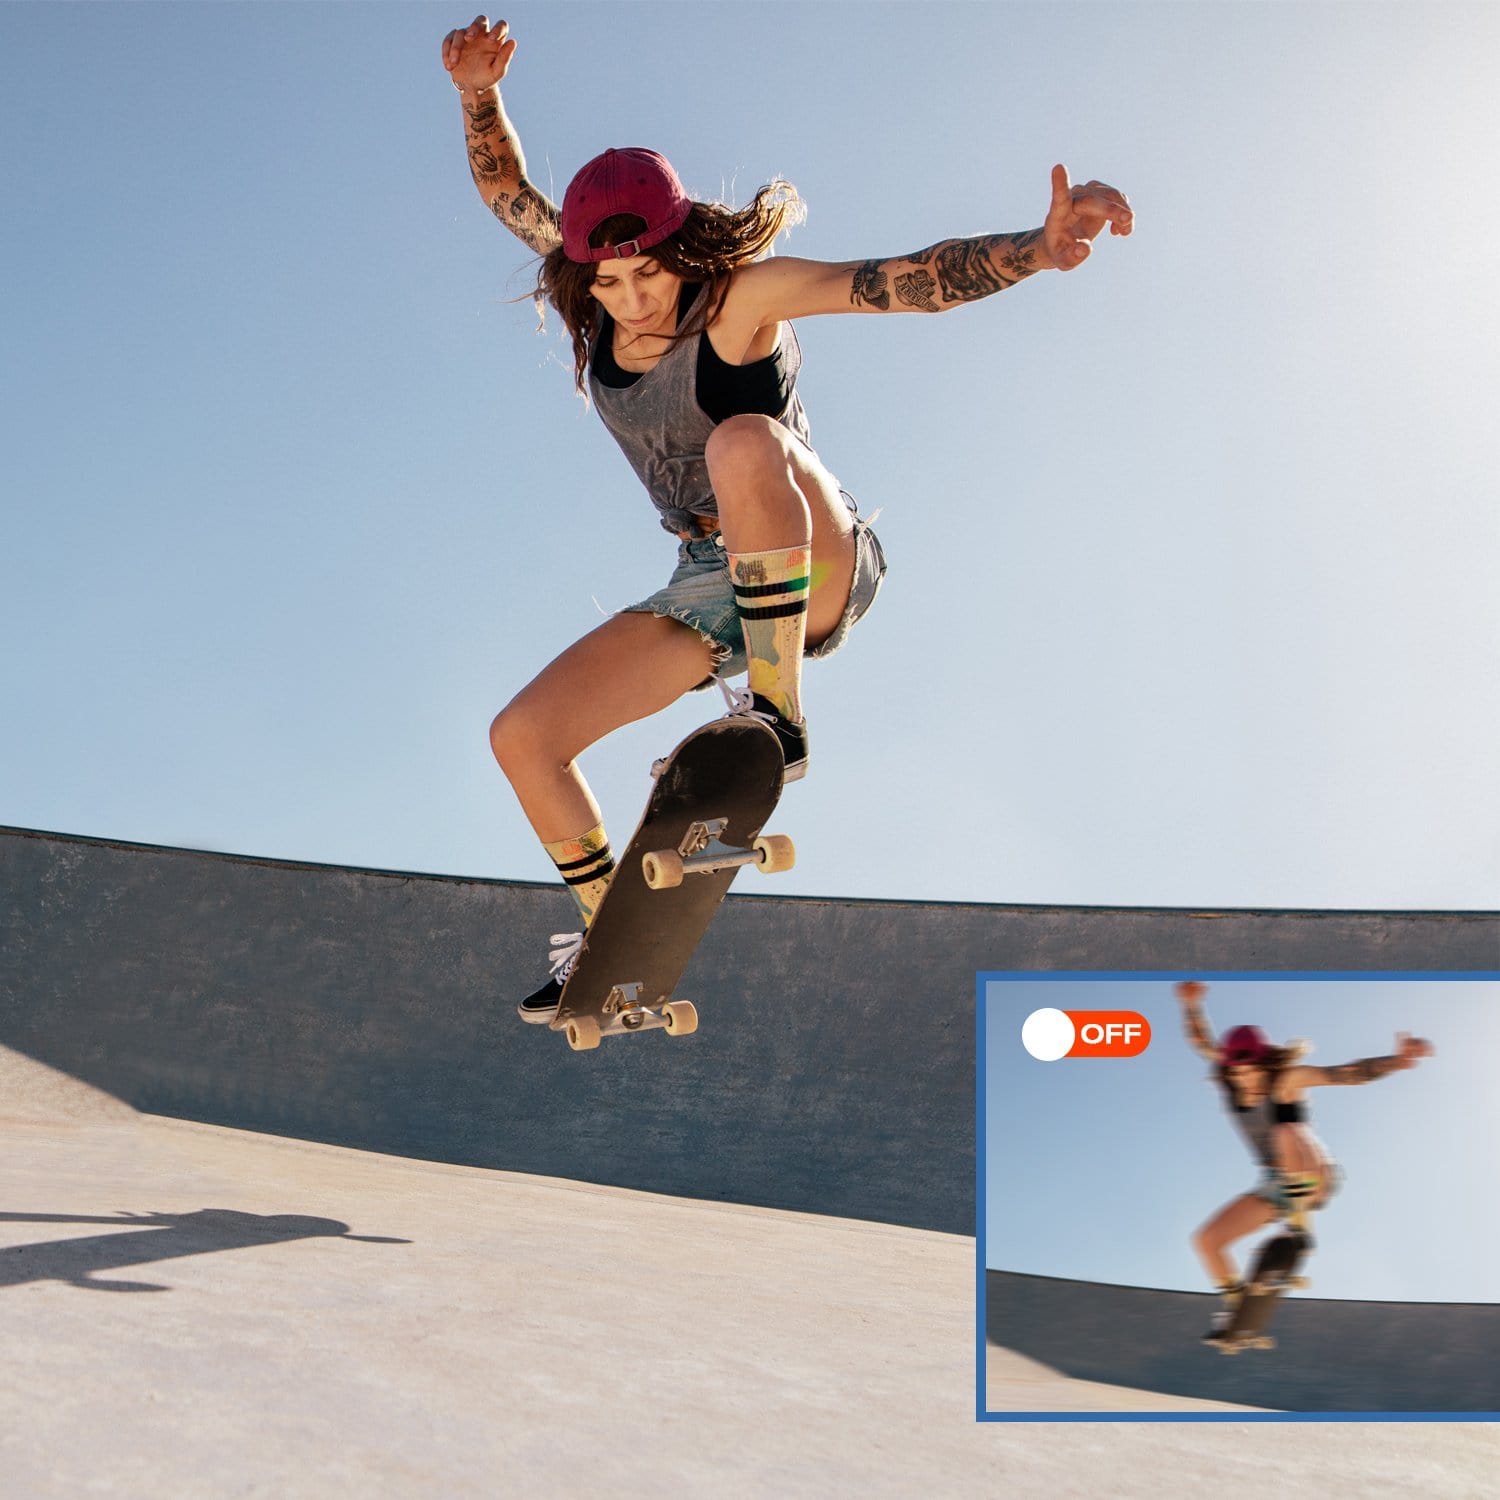 Capture the moment of skateboarding with a Campark V30 Action Camera